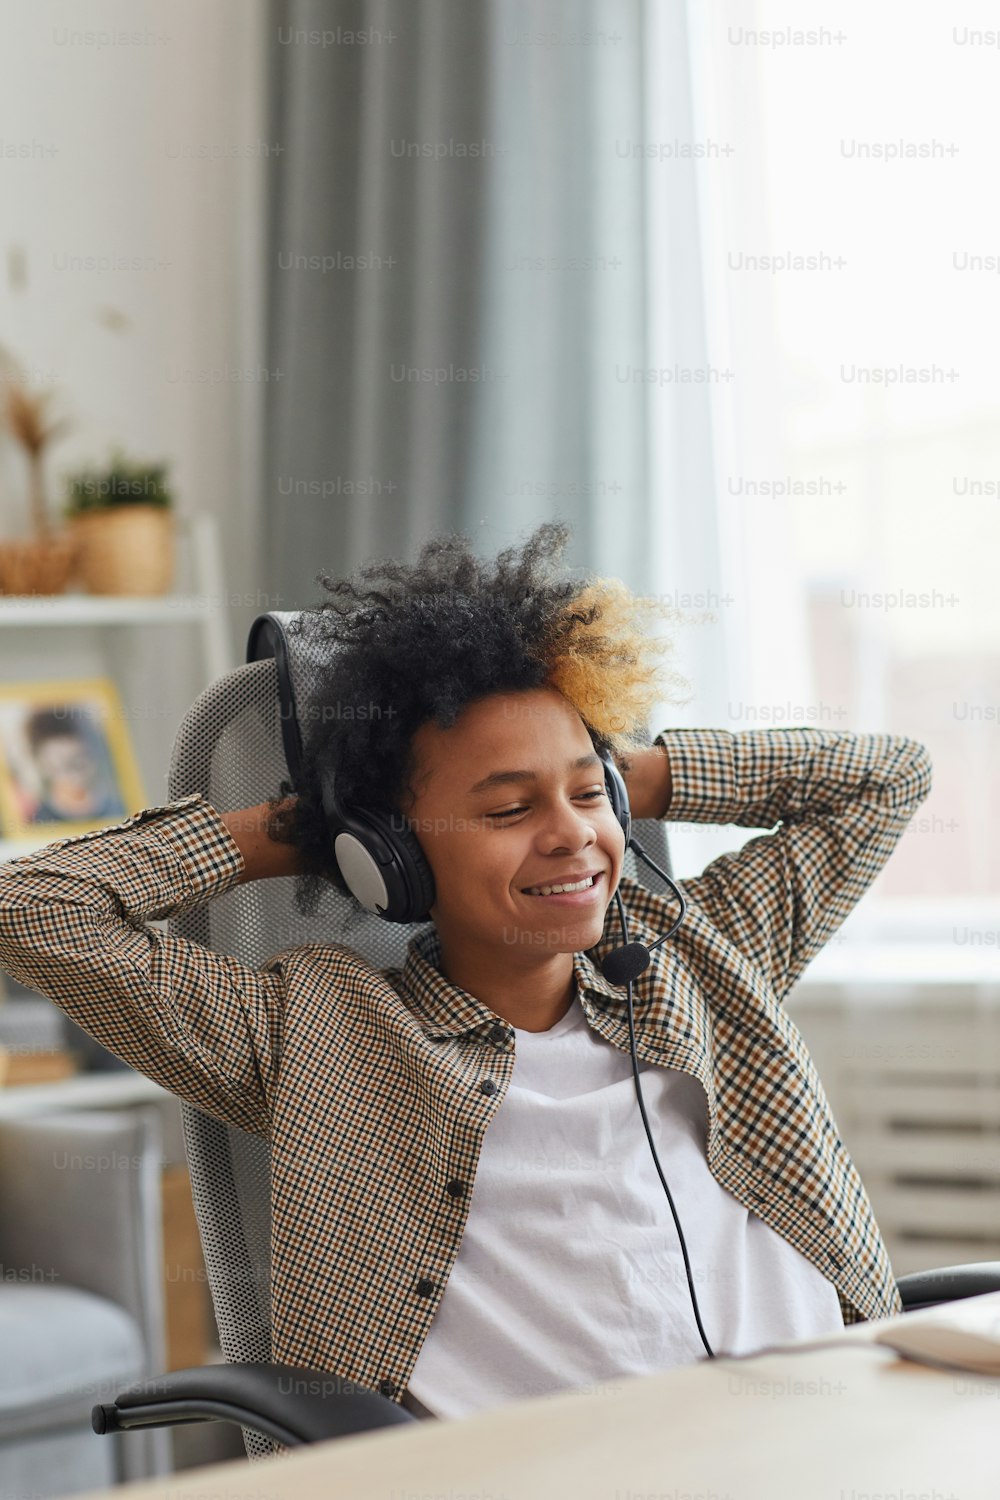 Vertical portrait of smiling African-American boy wearing headset and relaxing in chair while using laptop at home, gamer or blogger concept